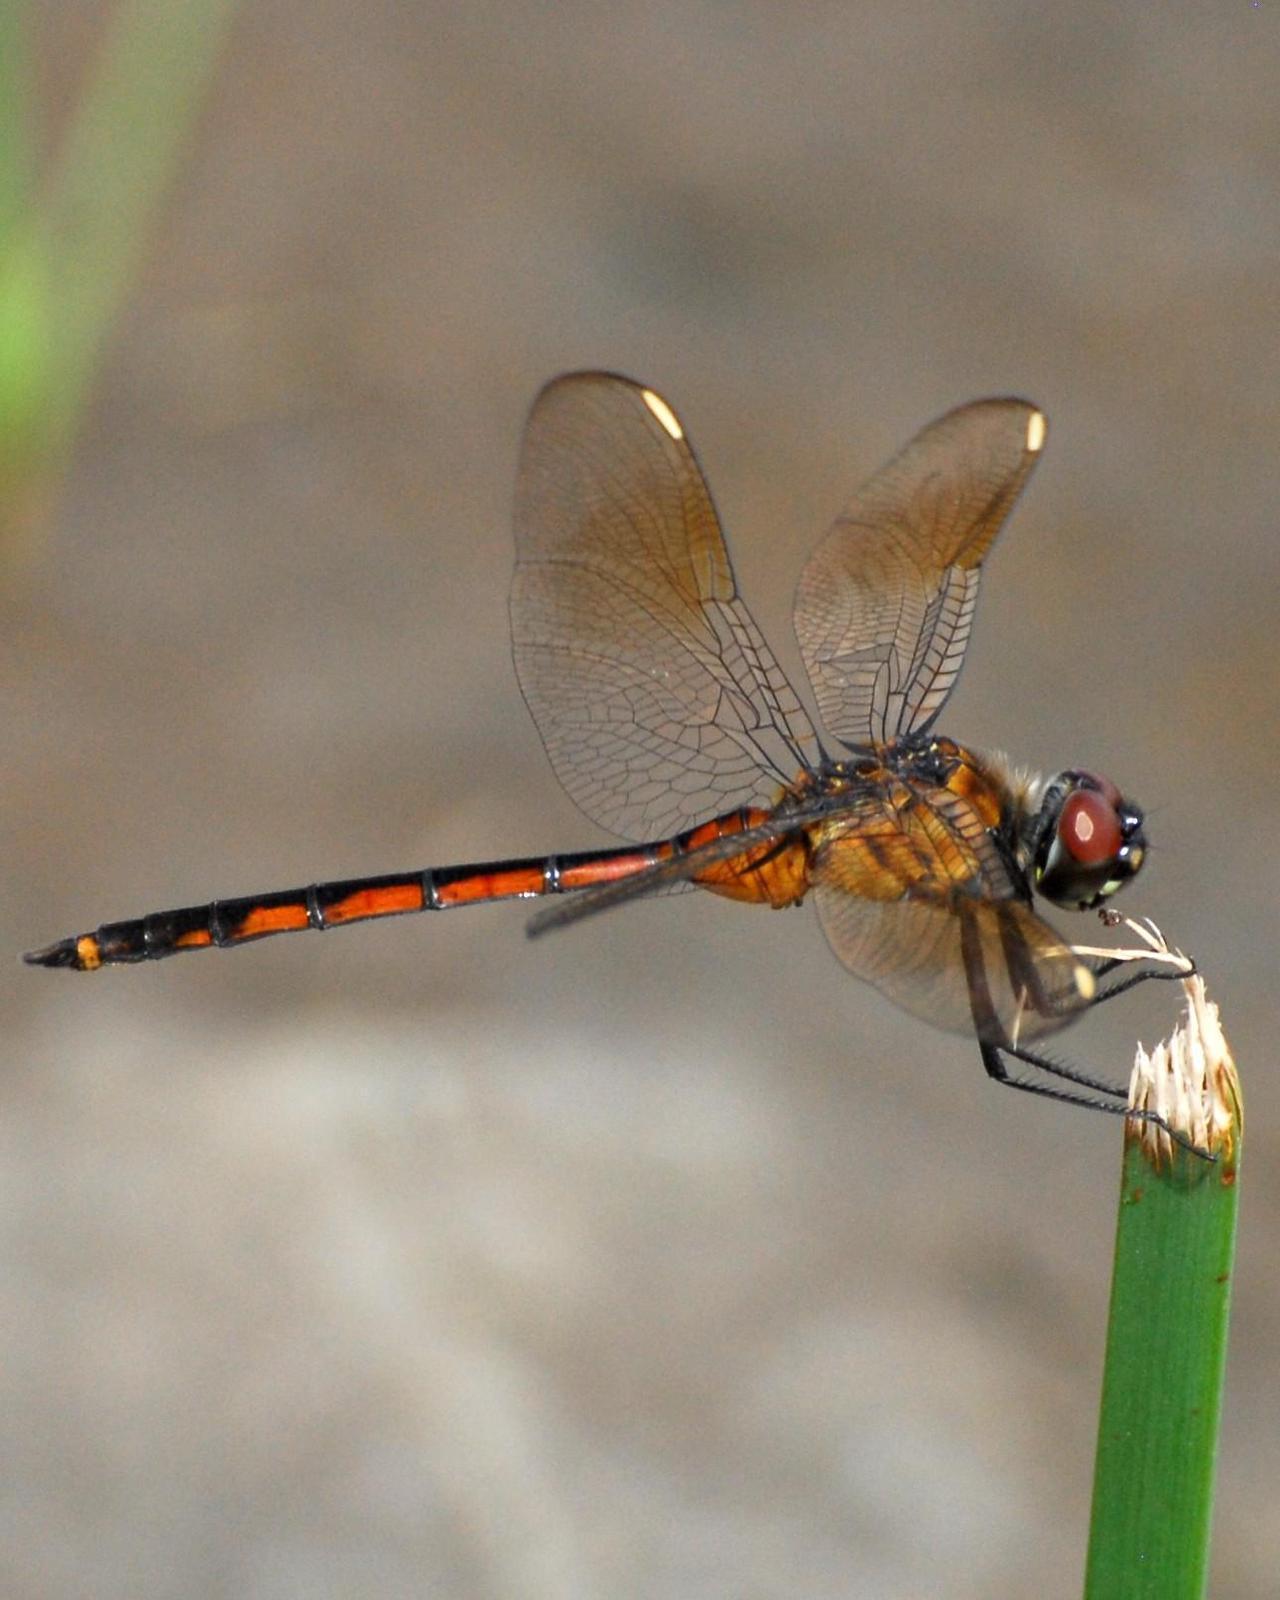 Four-spotted Pennant Photo by David Hollie